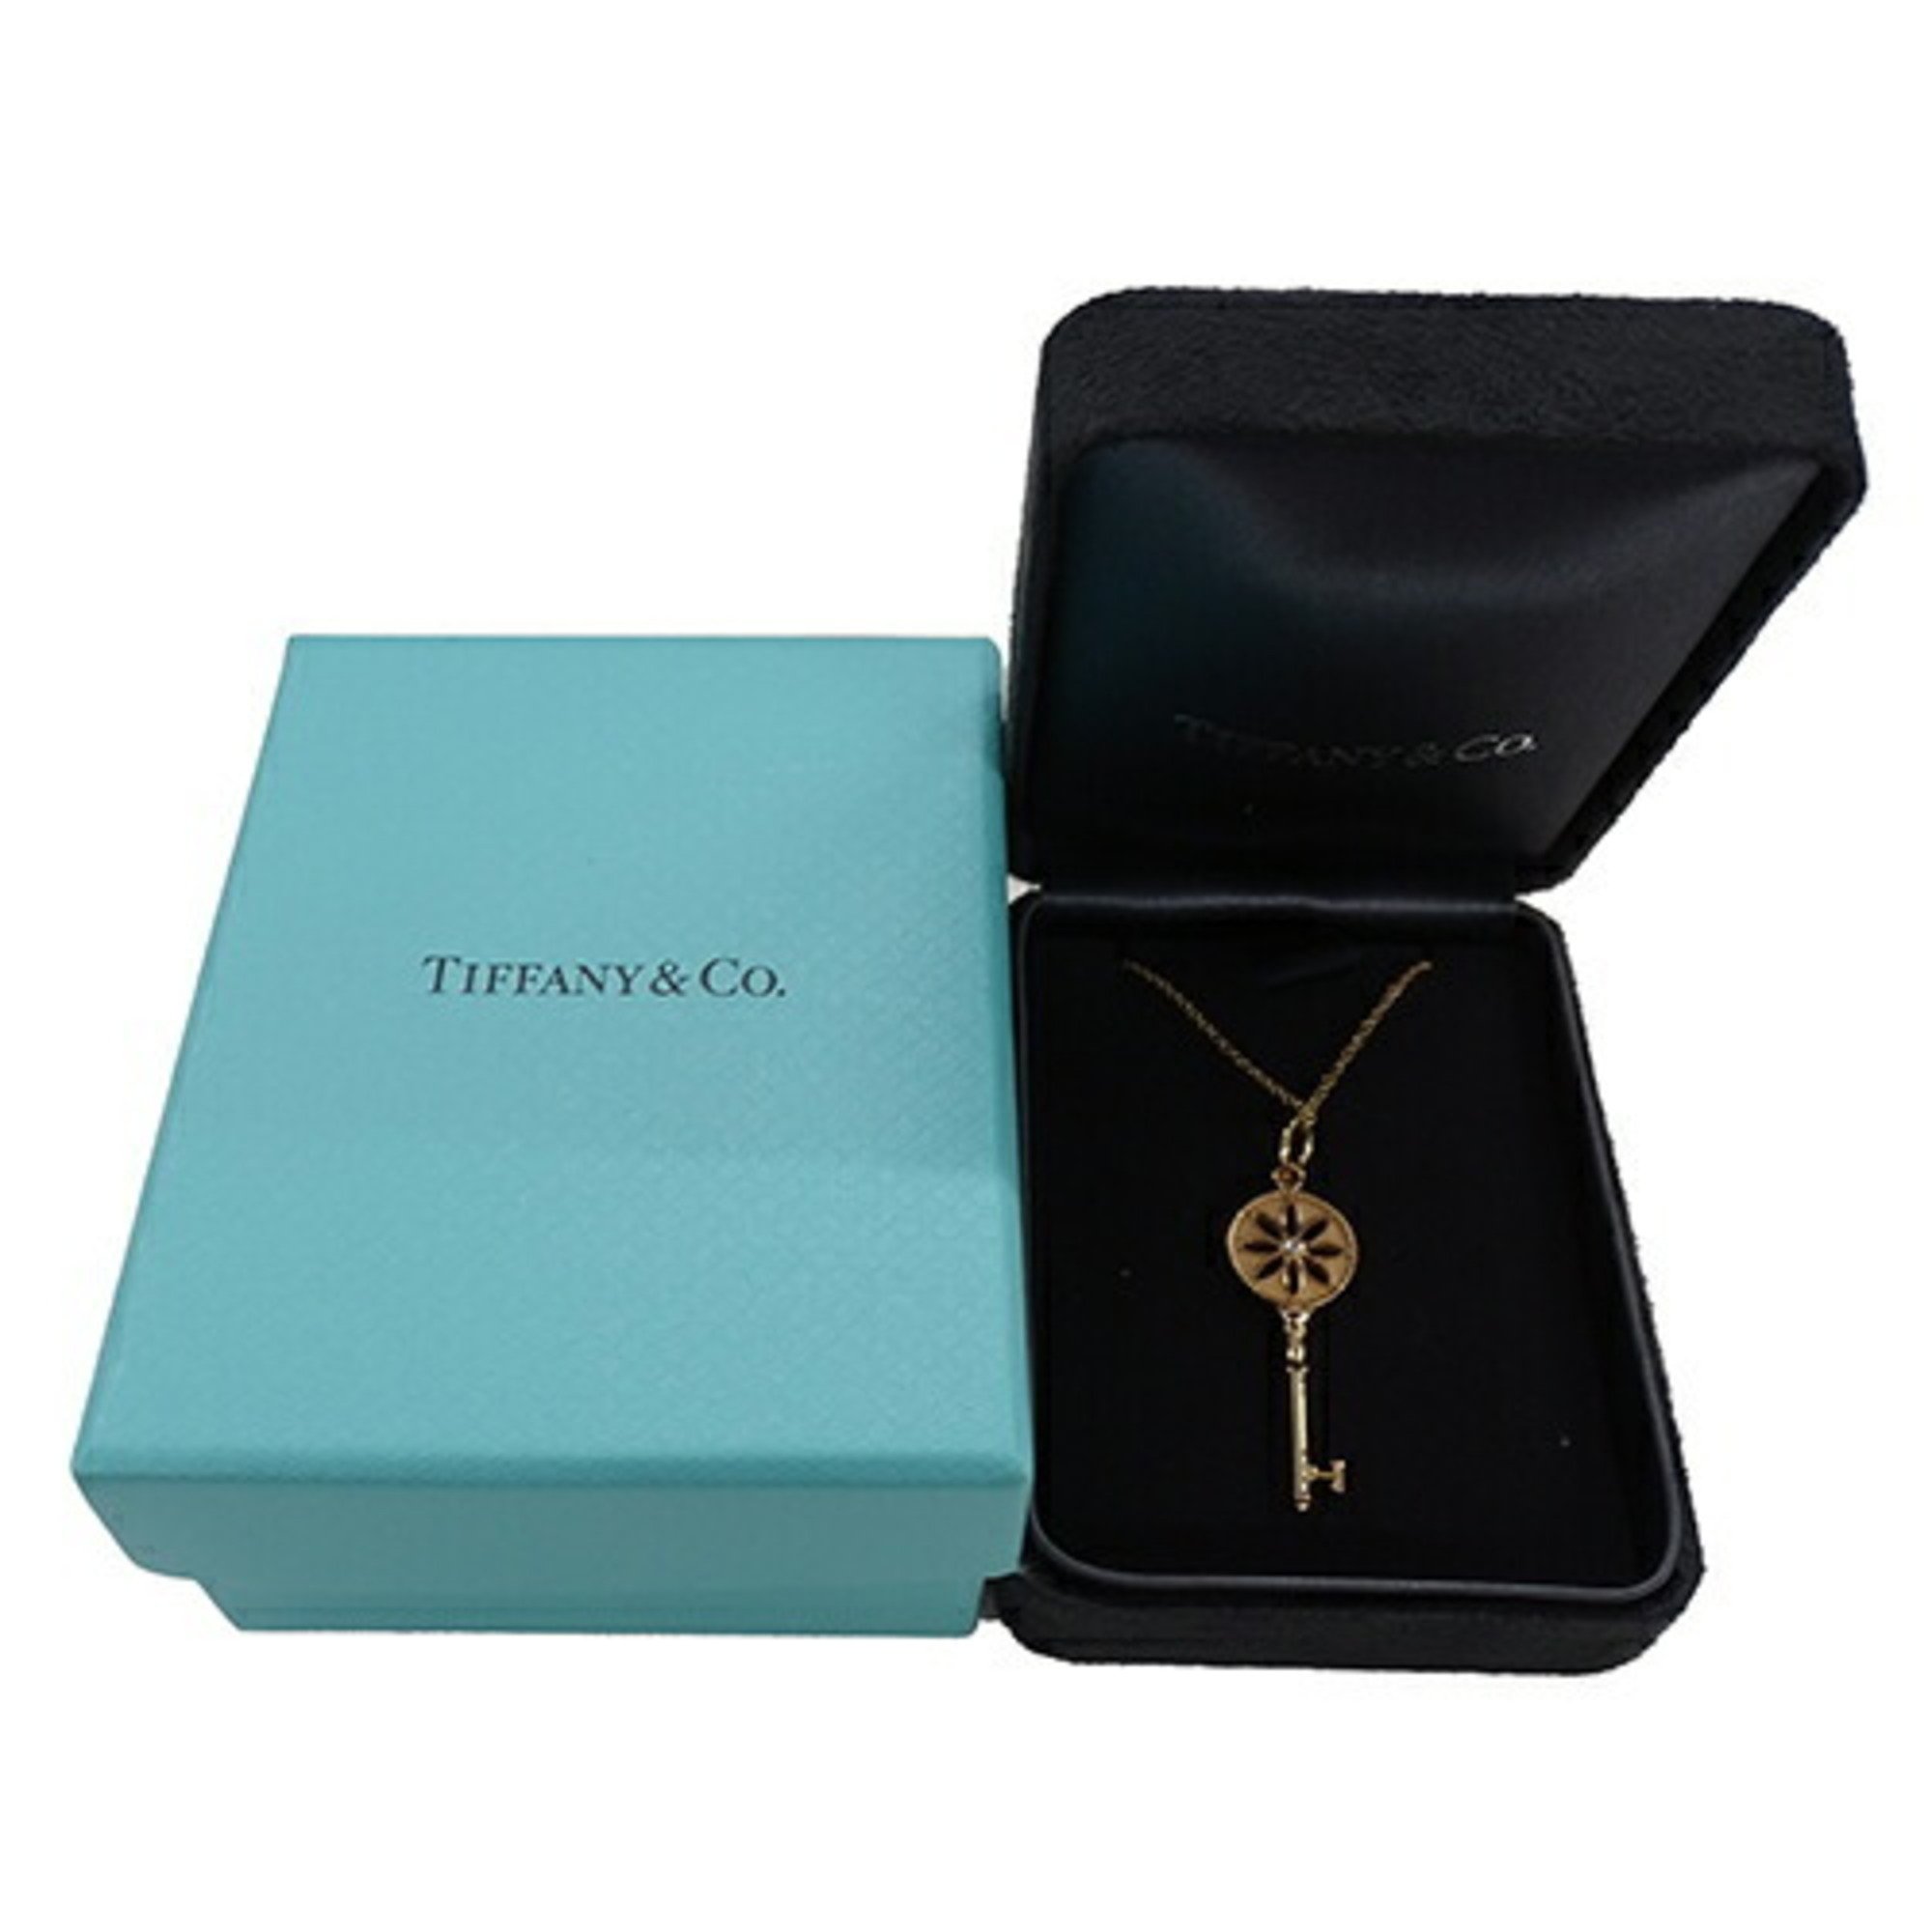 Tiffany & Co. Necklace for women, 750PG, 1P, Diamond, Daisy Key, Pink Gold, Polished